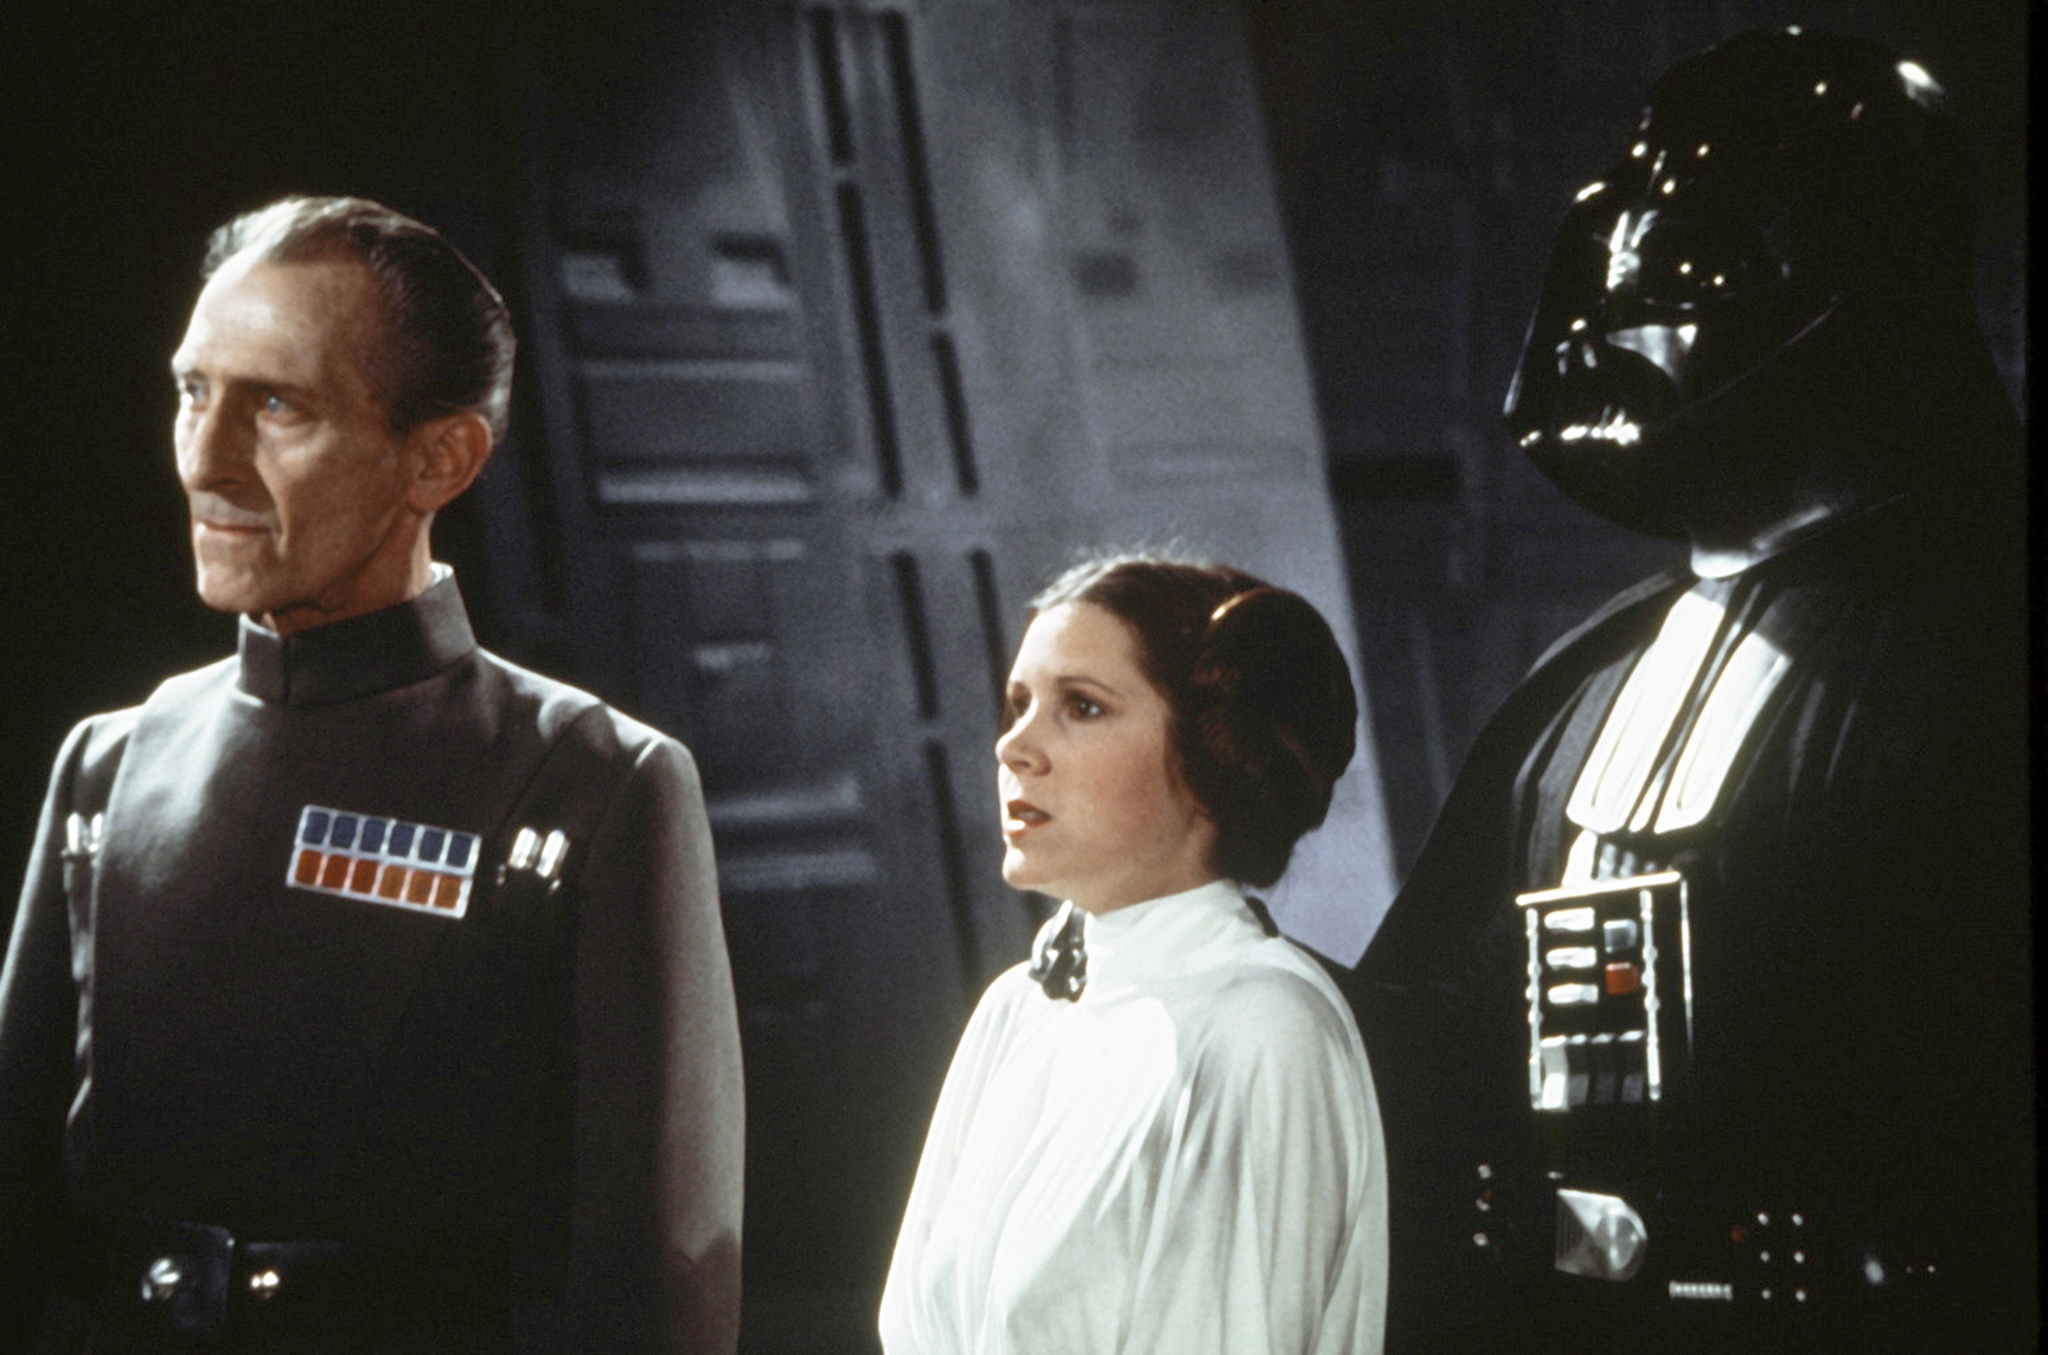 Carrie Fisher, James Earl Jones, Peter Cushing, and David Prowse in Star Wars: Episode IV - A New Hope (1977)